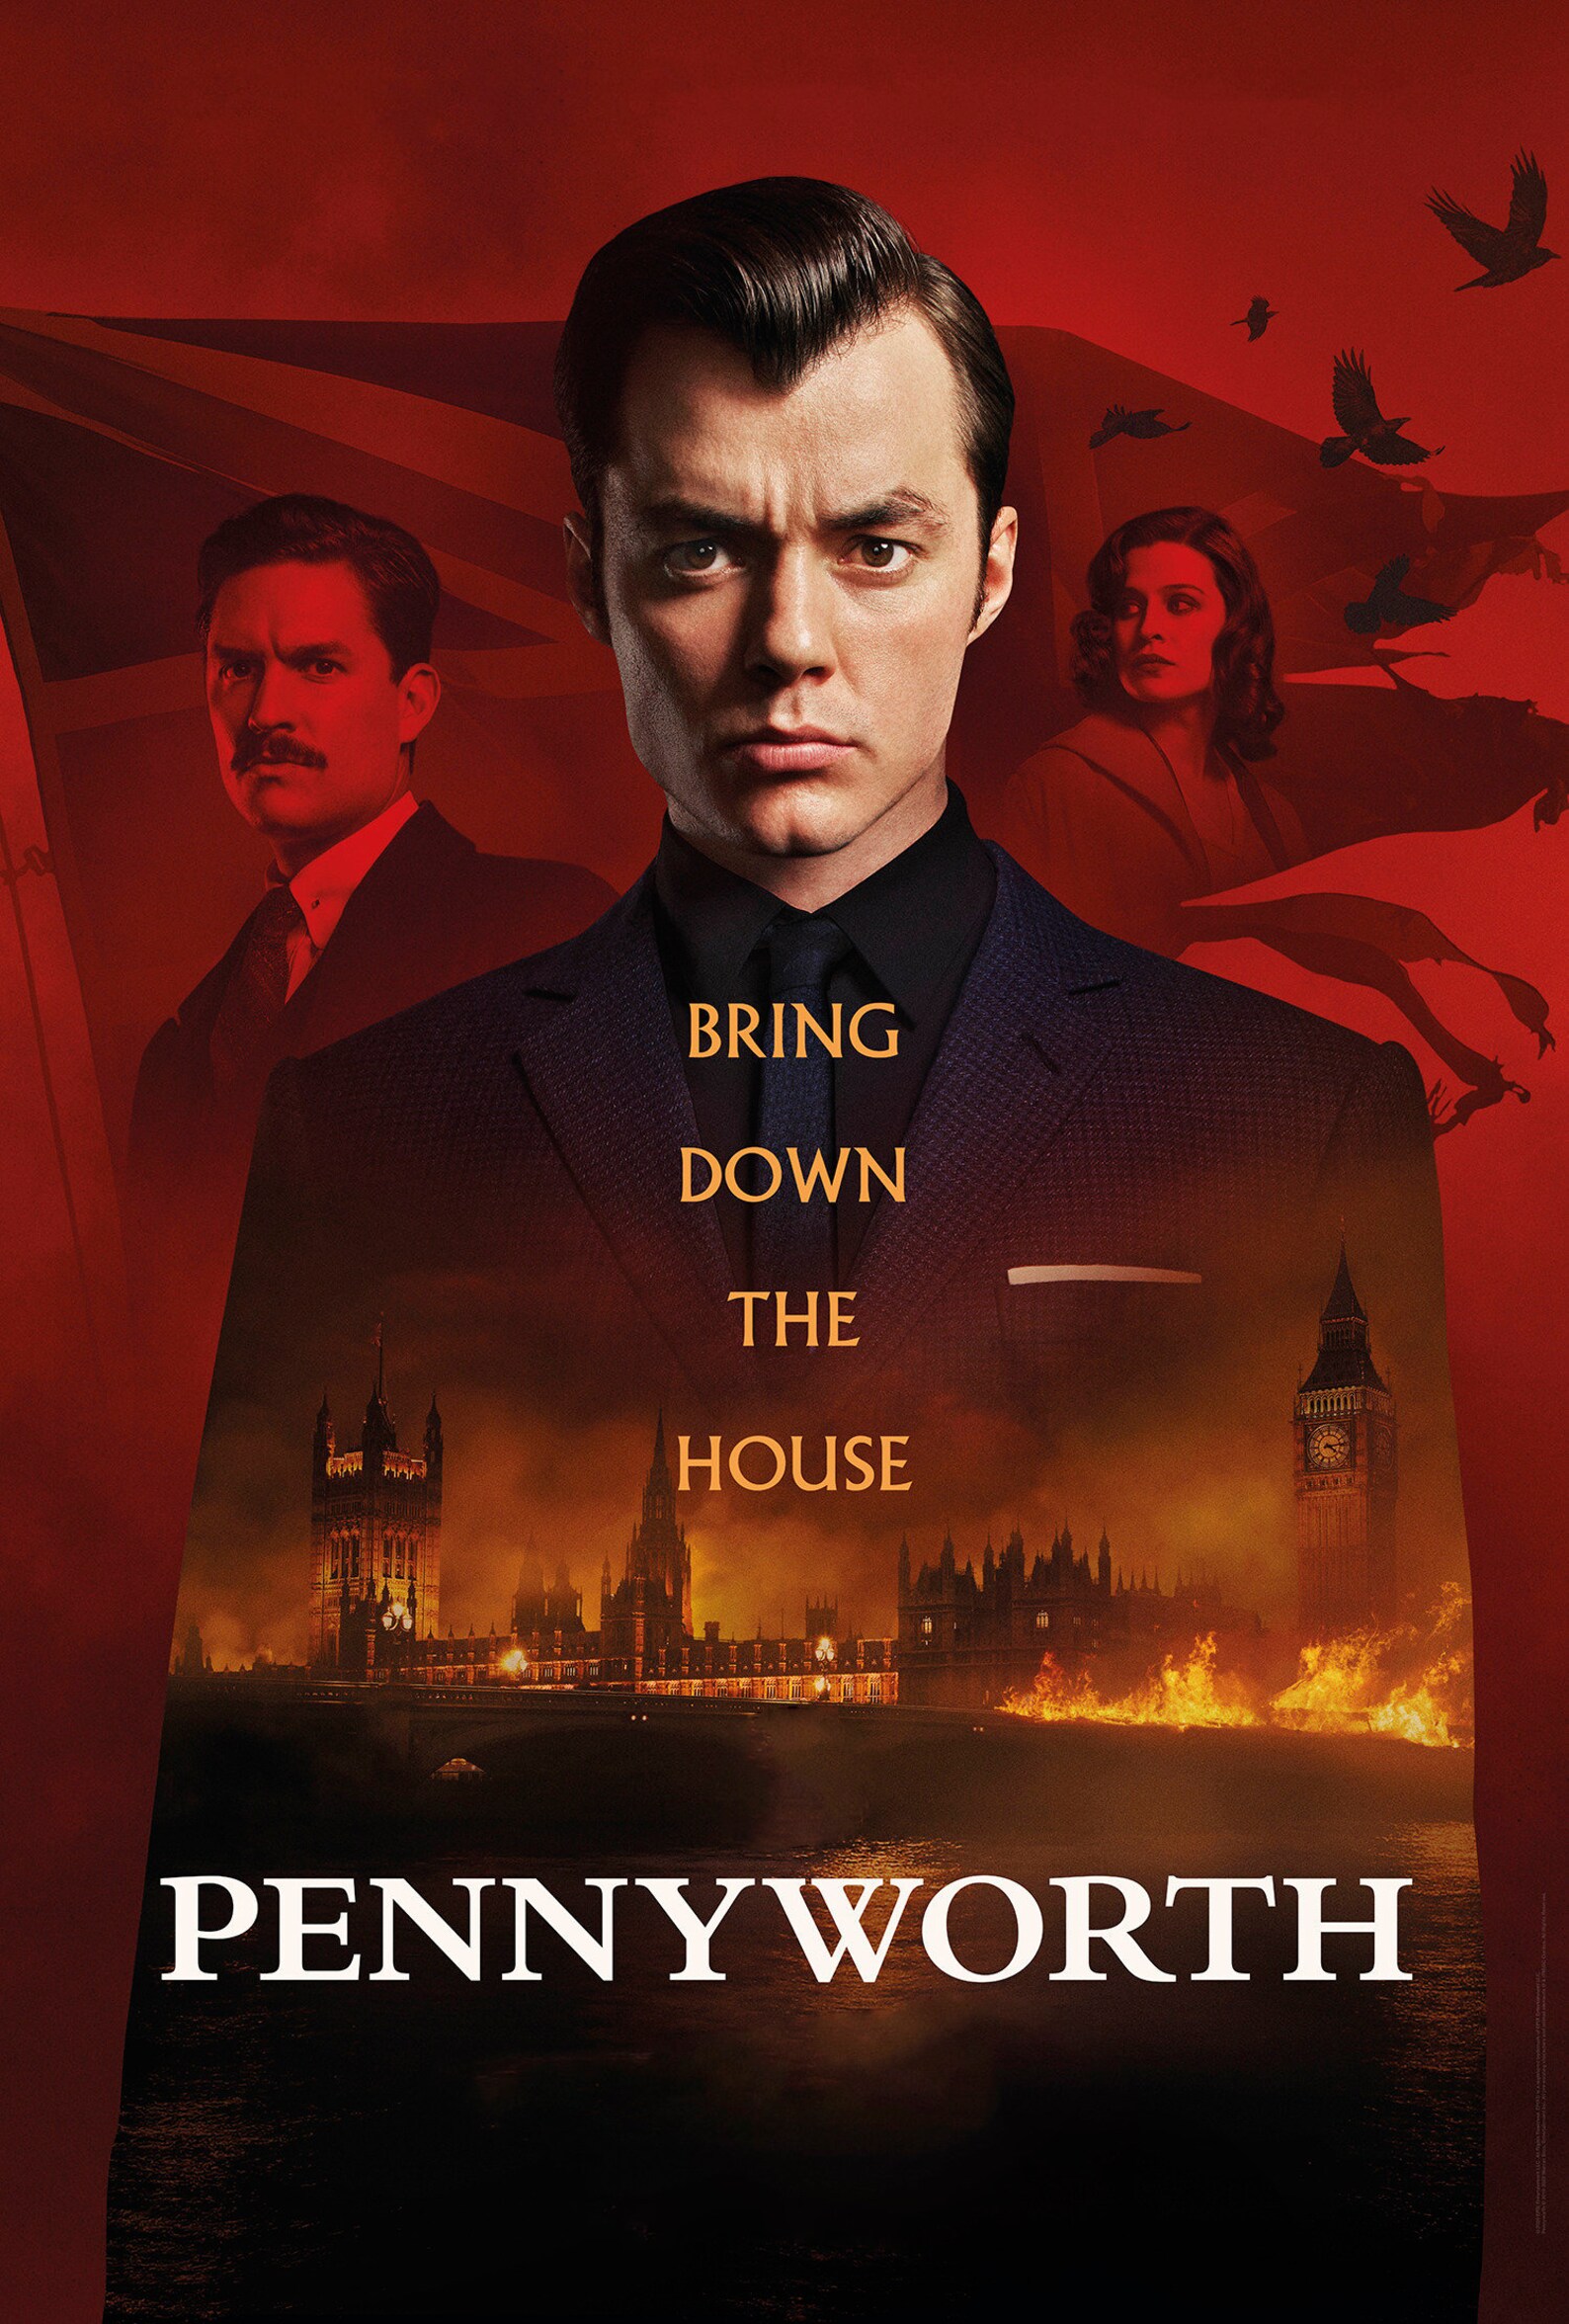 Man in forefront and man and women in background. Text underneath "Bring down the house, Pennyworth" - poster